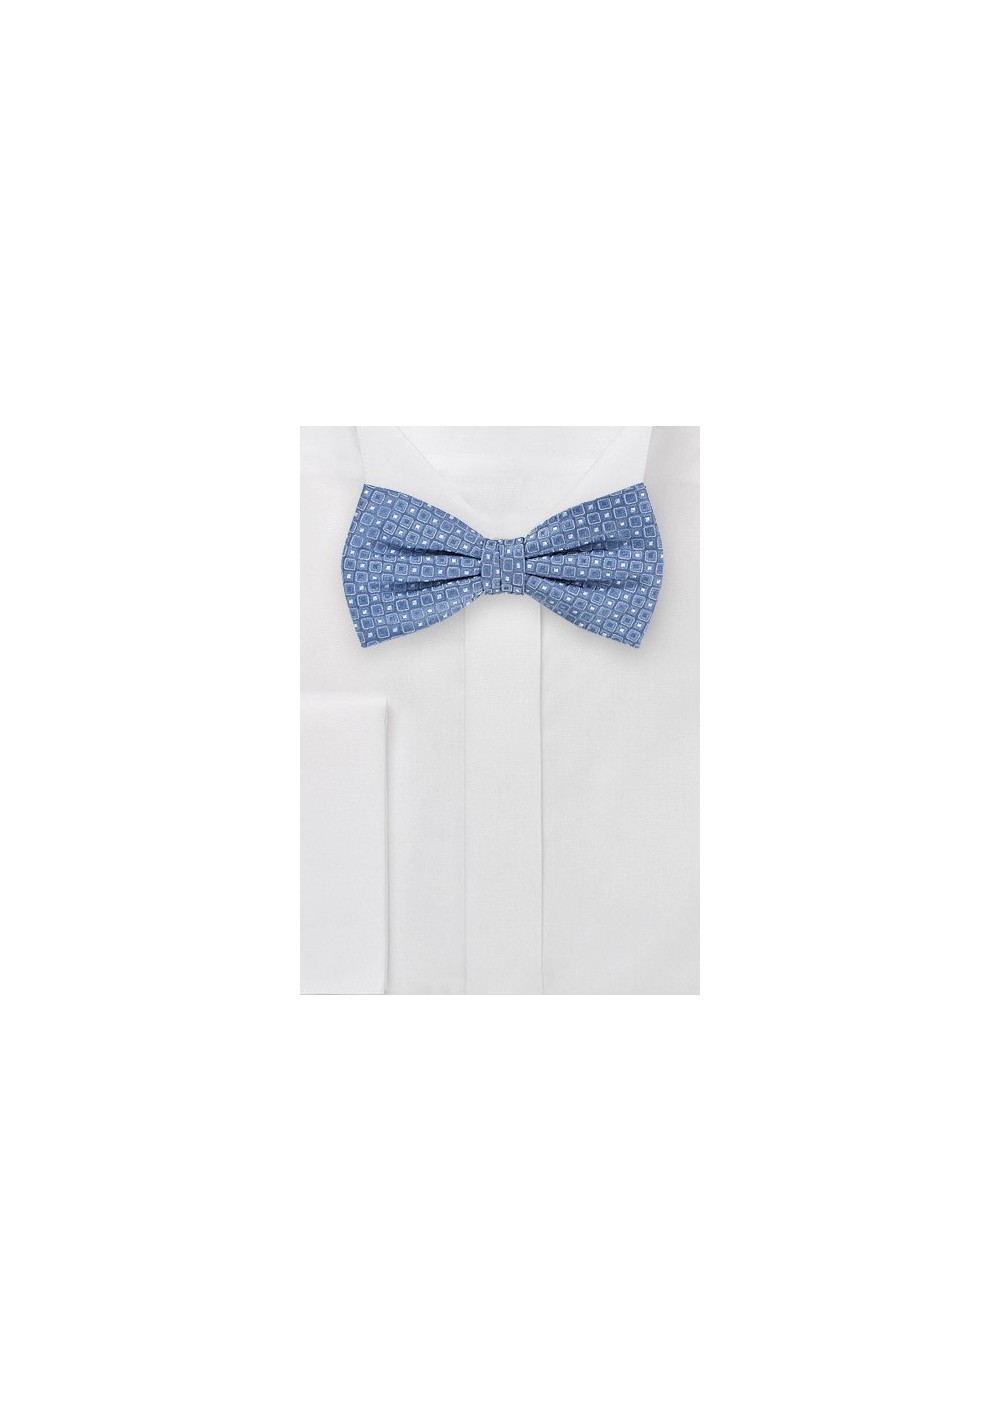 Pre-tied Bowtie in Indigo with Tiny Square Pattern